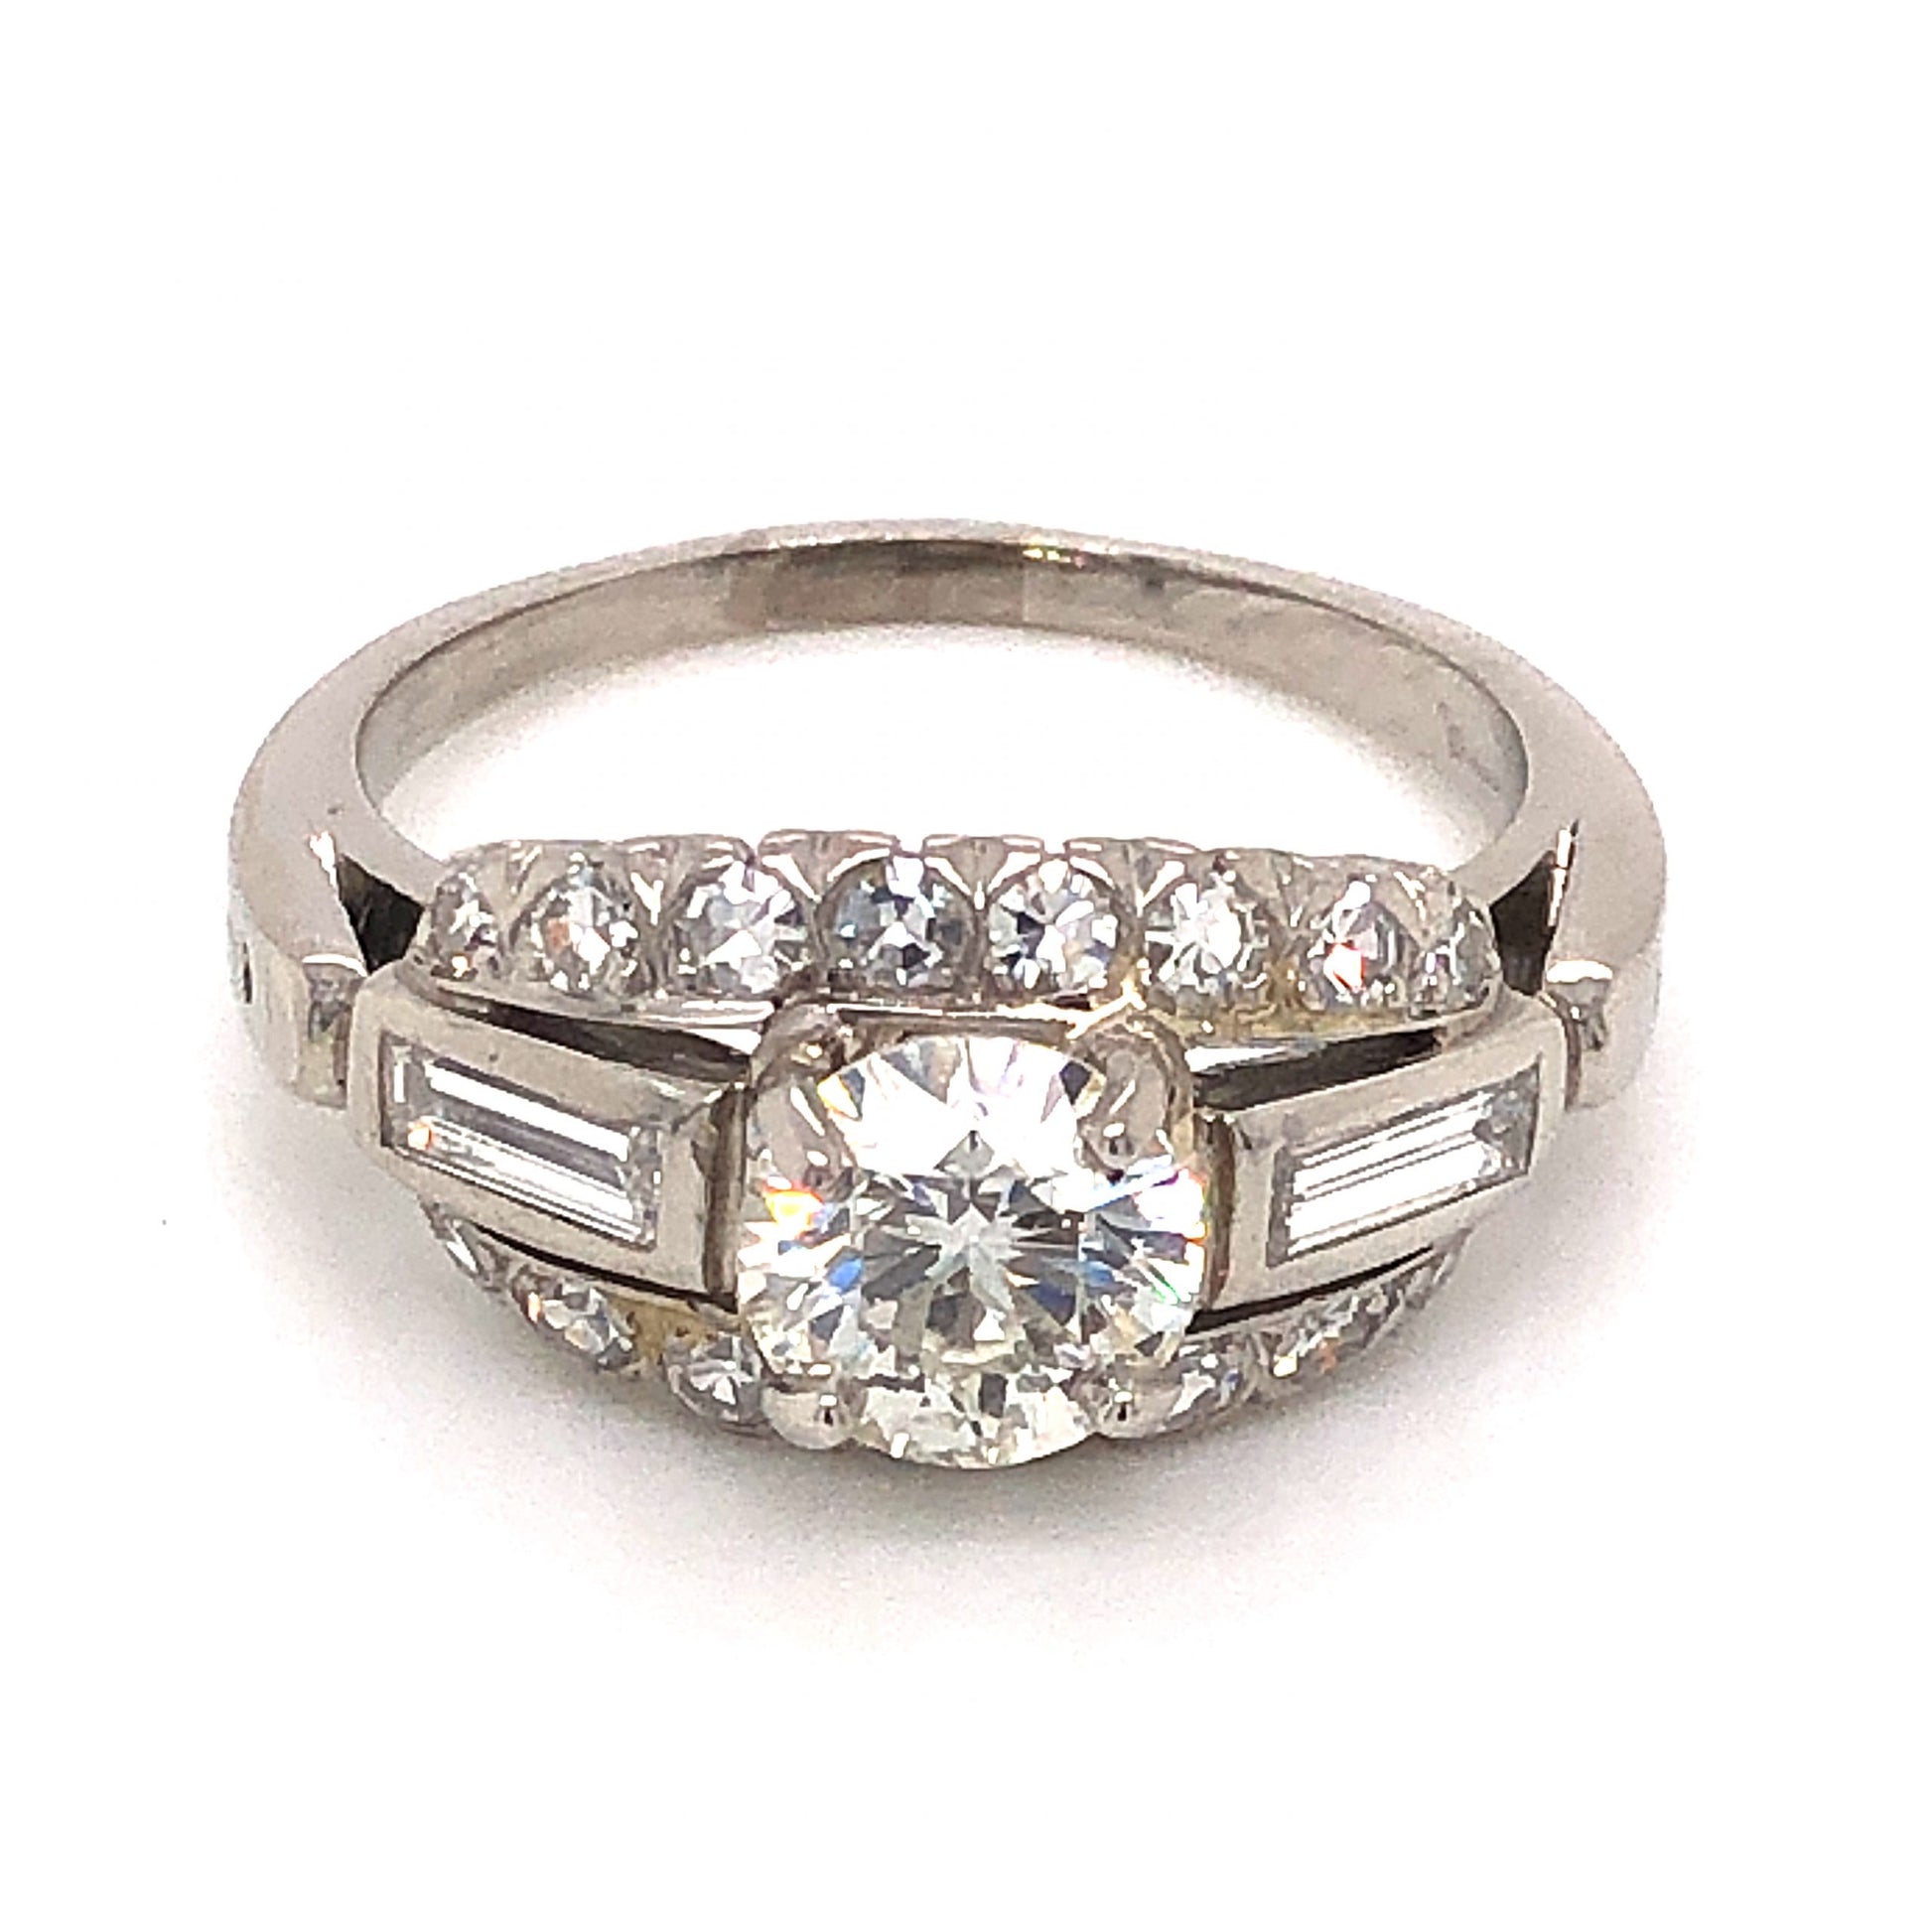 .84 Mid-Century Diamond Engagement Ring in PlatinumComposition: Platinum Ring Size: 5.75 Total Diamond Weight: 1.62 ct Total Gram Weight: 6.18  g